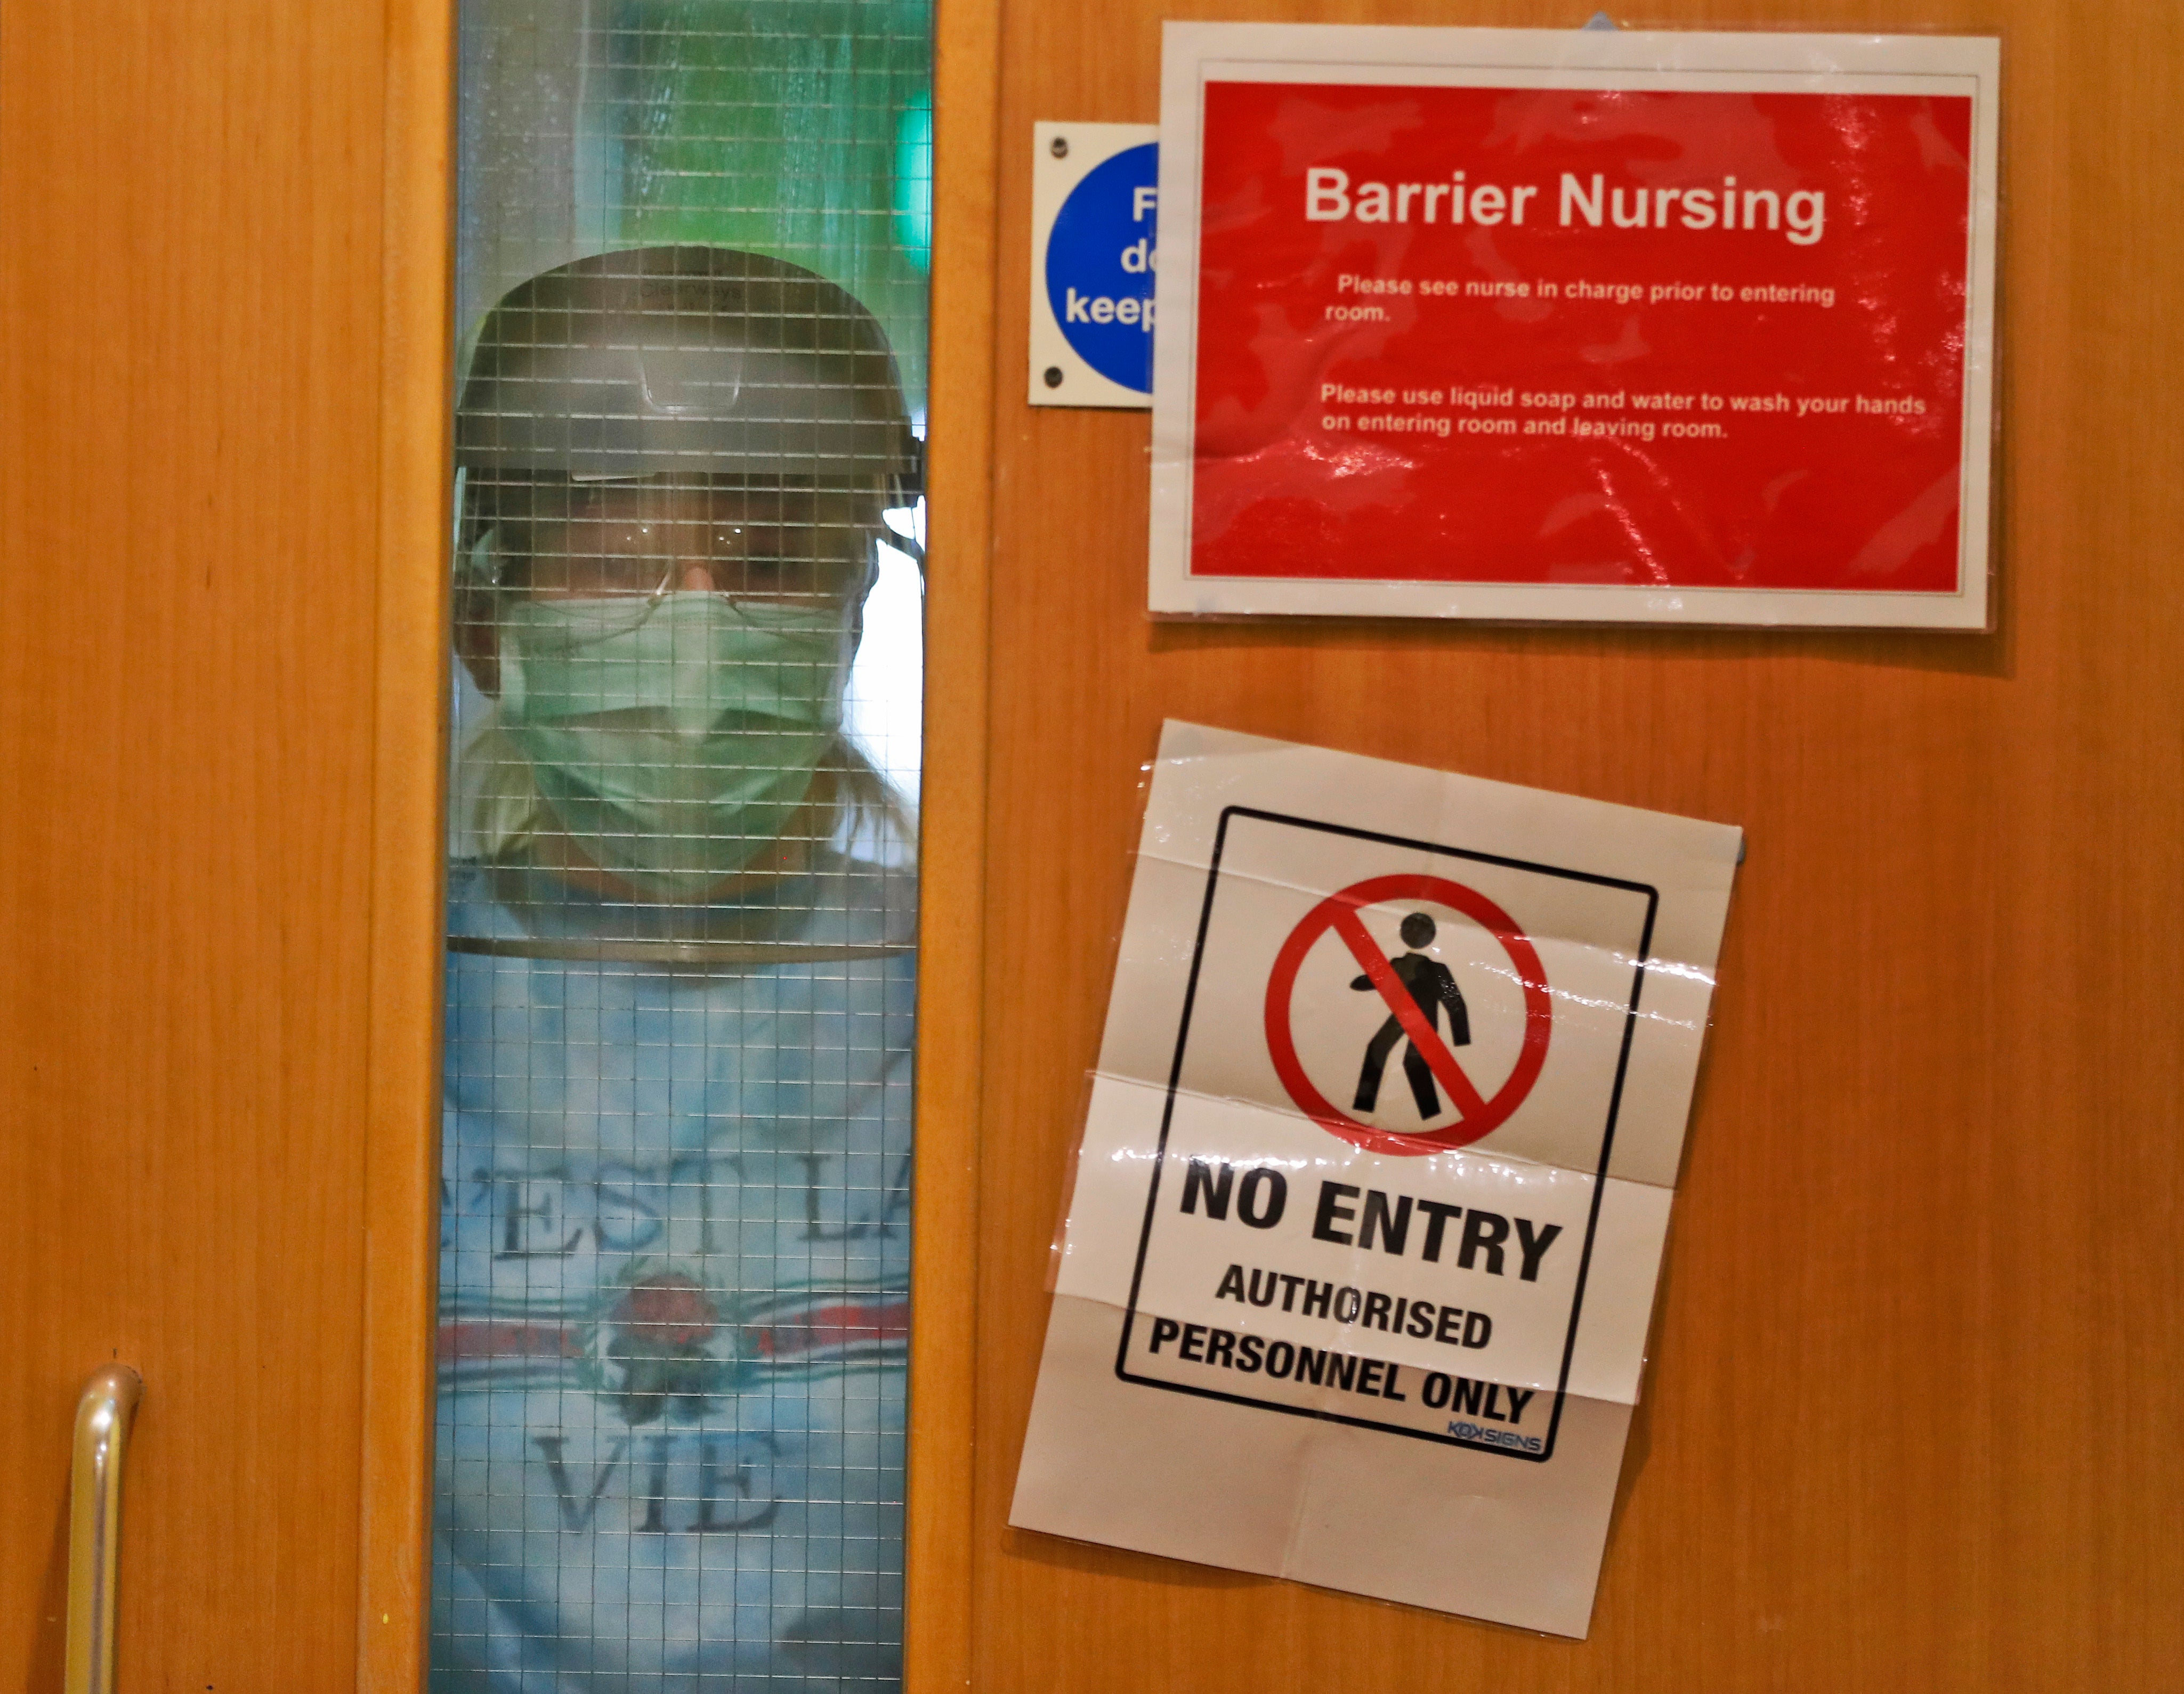 A scene inside the Wren Hall care home in Nottingham in April 2020 at the start of the pandemic